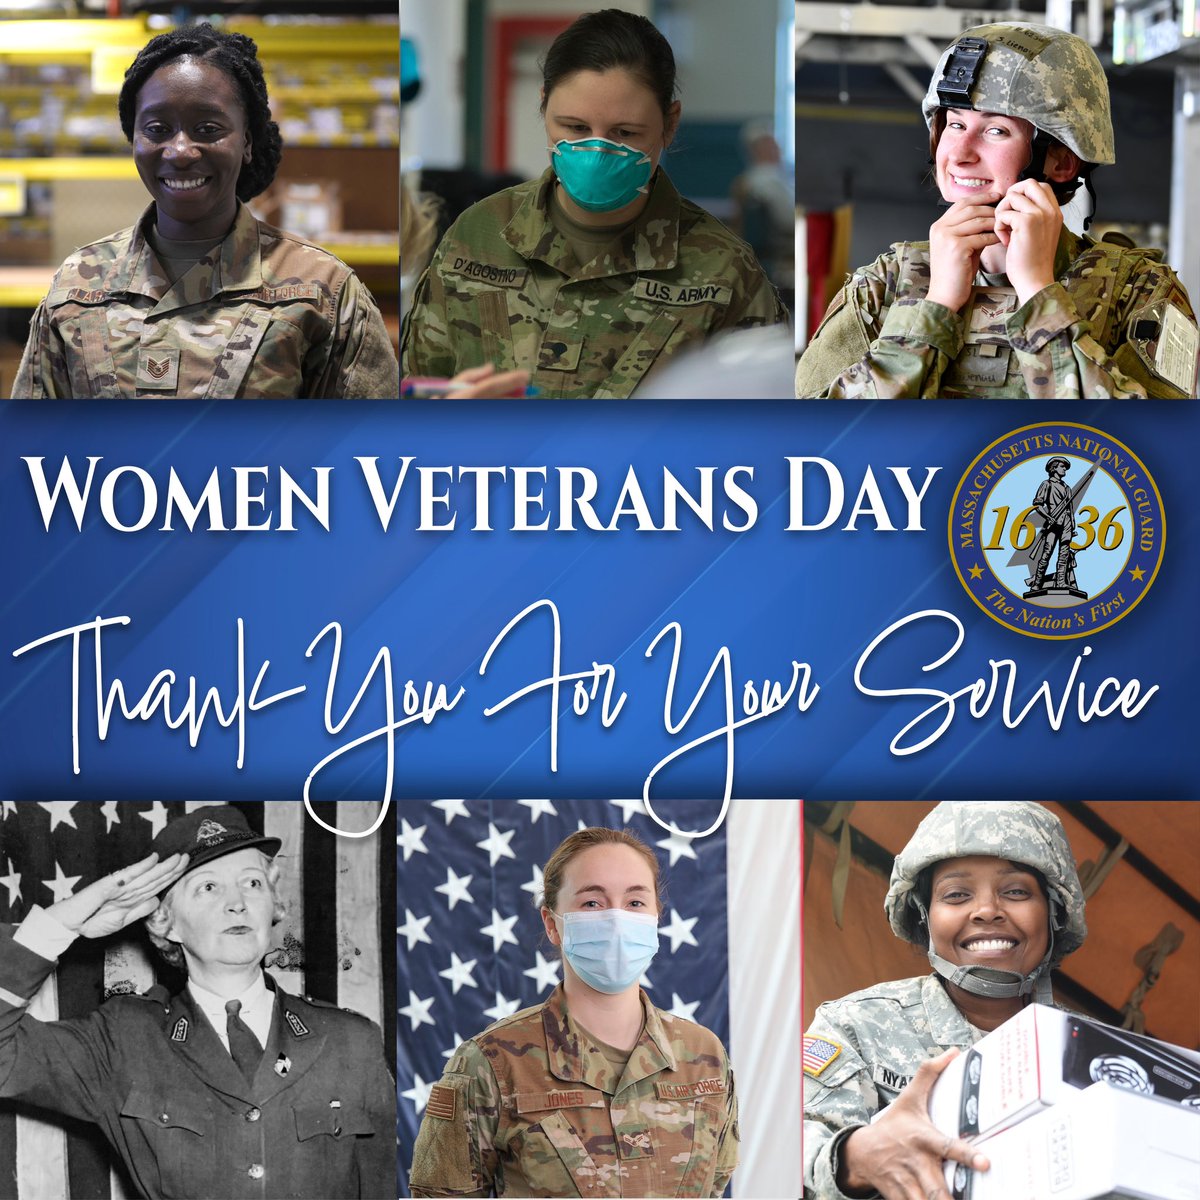 Happy #WomenVeteransDay !

Today marks the anniversary of the groundbreaking Women's Armed Services Integration Act, signed into law by President Harry S. Truman on June 12, 1948, enabling women to serve as permanent, regular members of the U.S. armed forces. #womenveteransrock